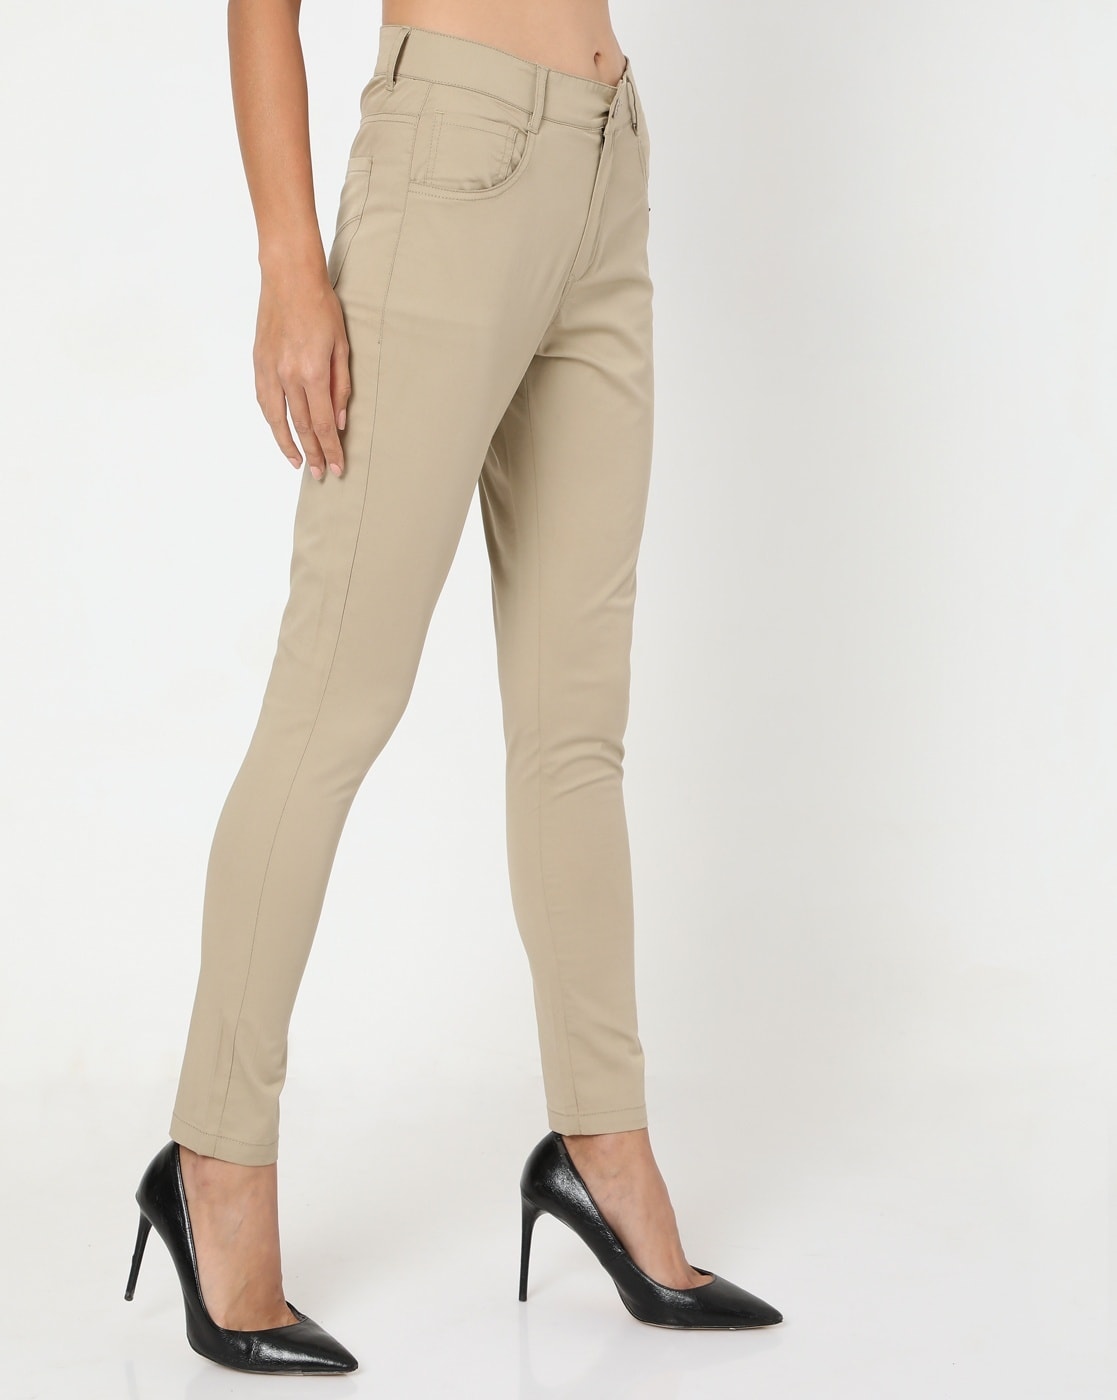 Insect Shield Women's Relaxed Stretch Twill Pants